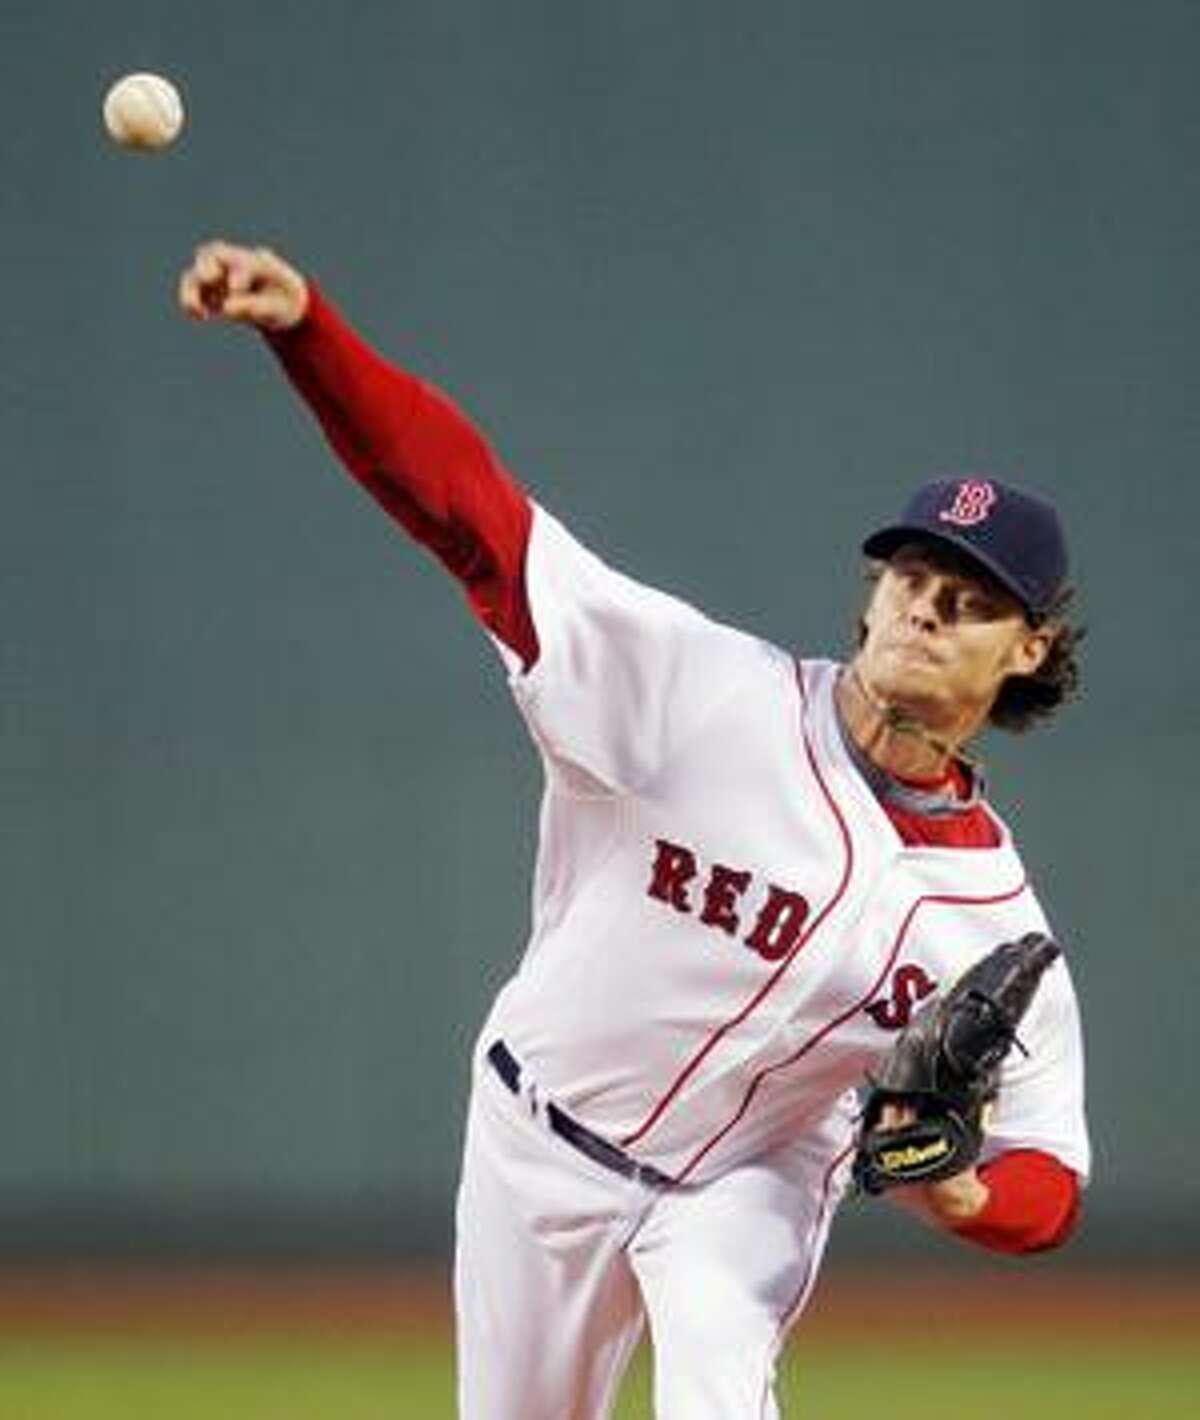 Boston Red Sox pitcher Daisuke Matsuzaka delivers a pitch during